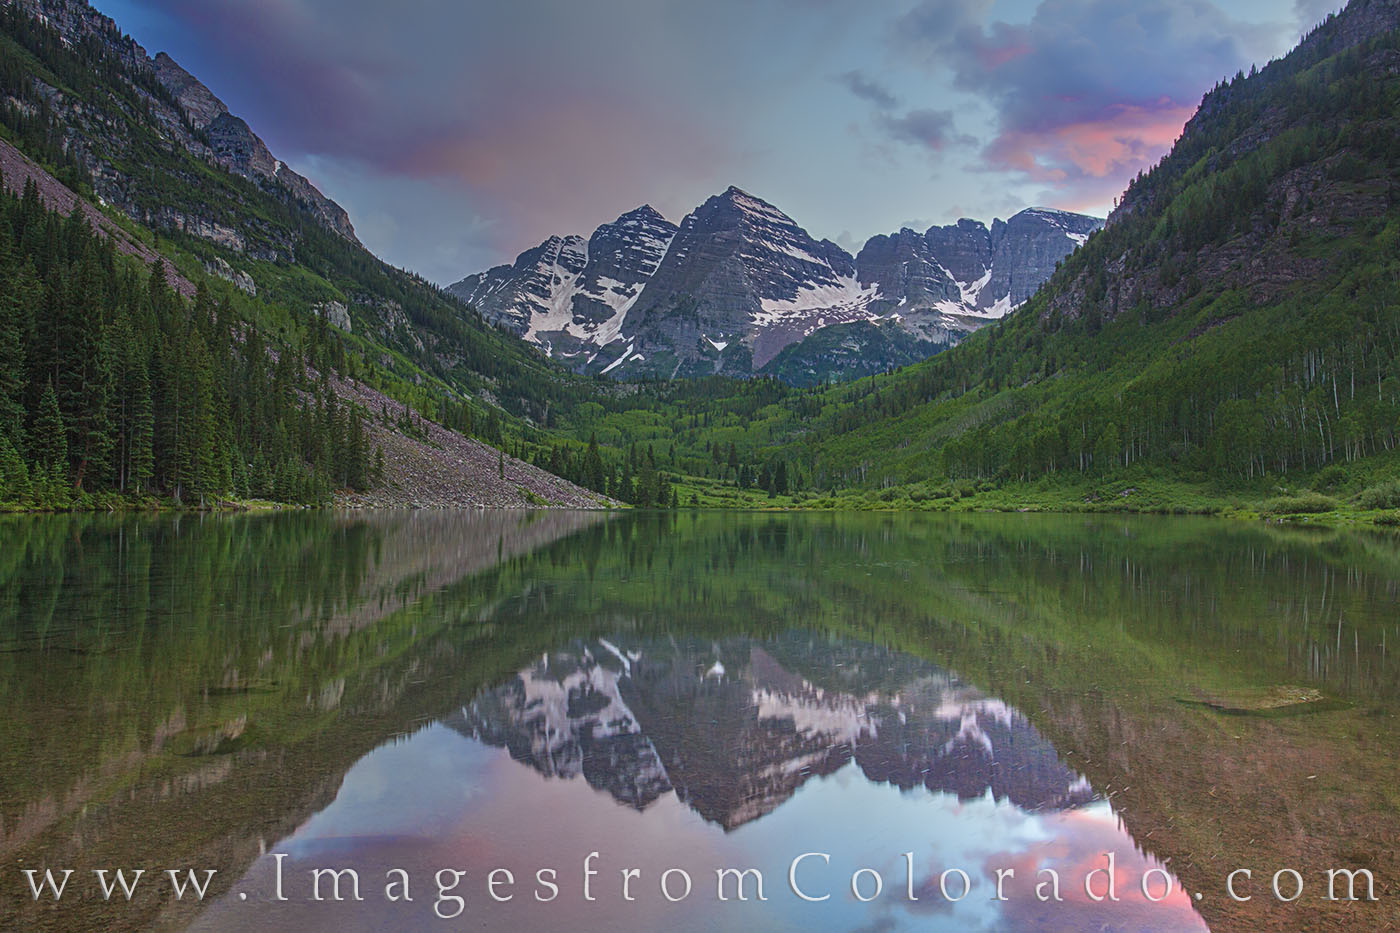 Evening falls across the Maroon Bells Wilderness Area near Aspen, Colorado. Maroon Lake was still and offered a great reflection...